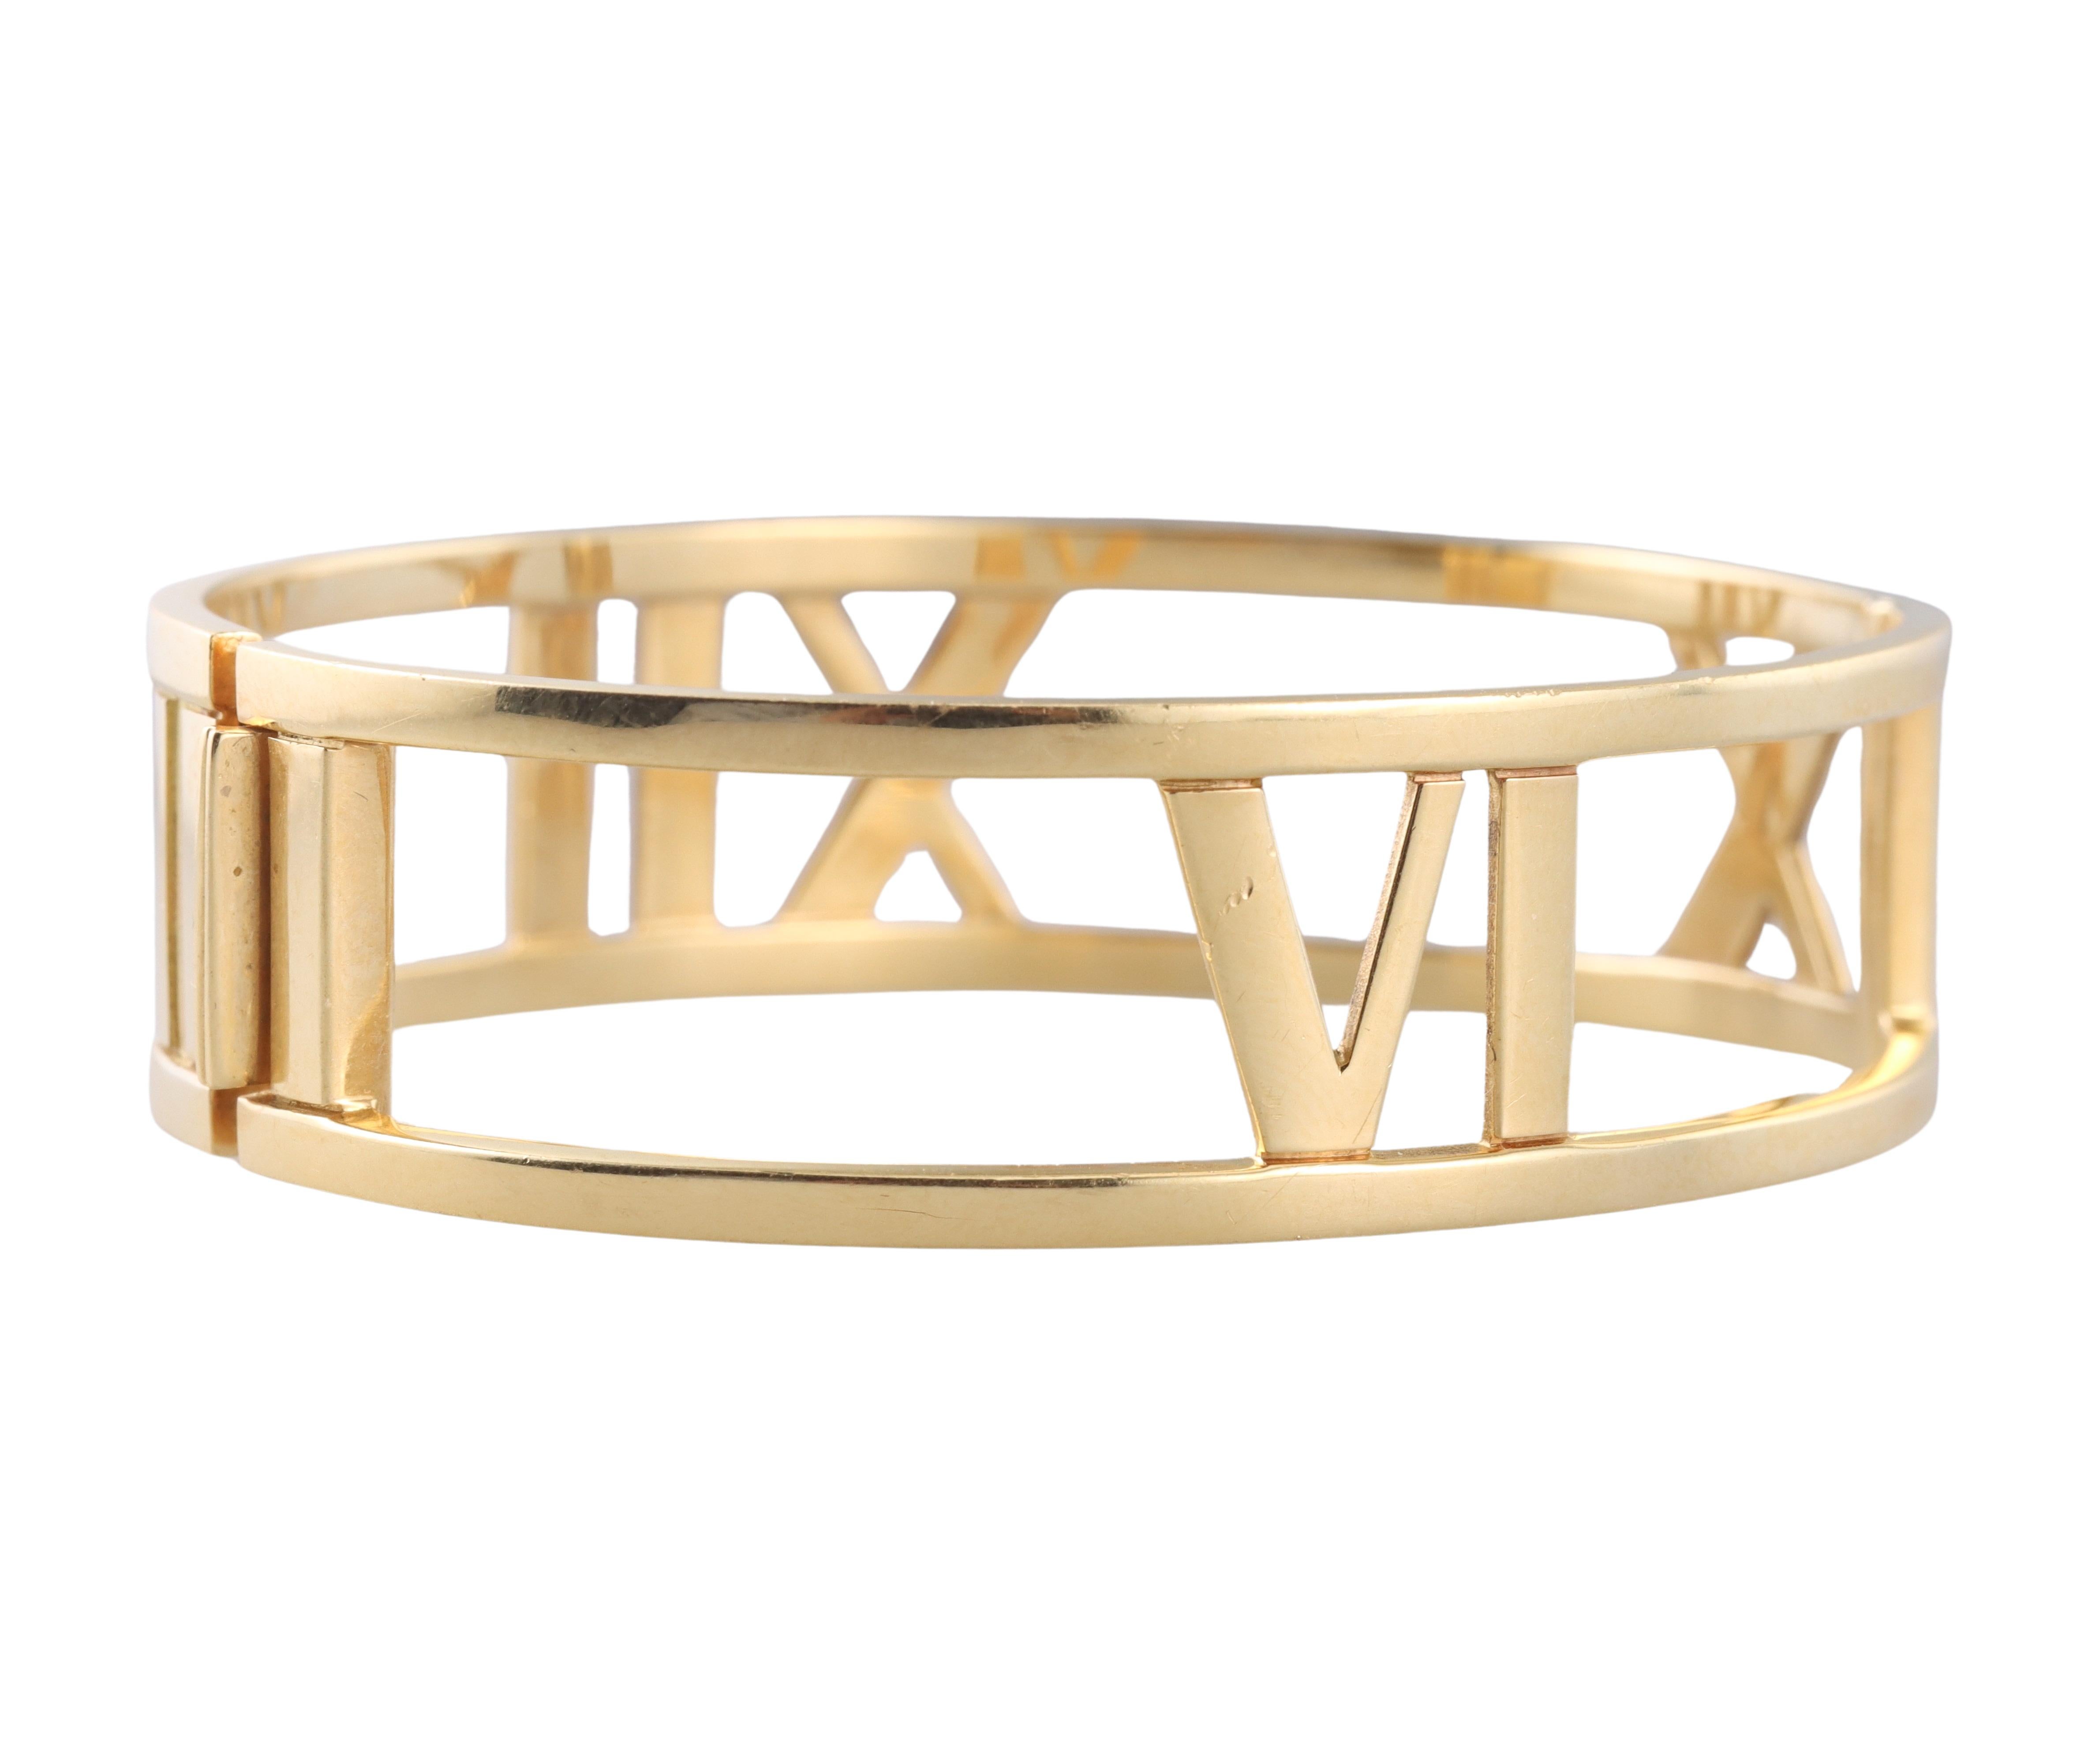 18k yellow gold bangle bracelet by Tiffany & Co, from Atlas collection. The bracelet will fit an approximately 6.5